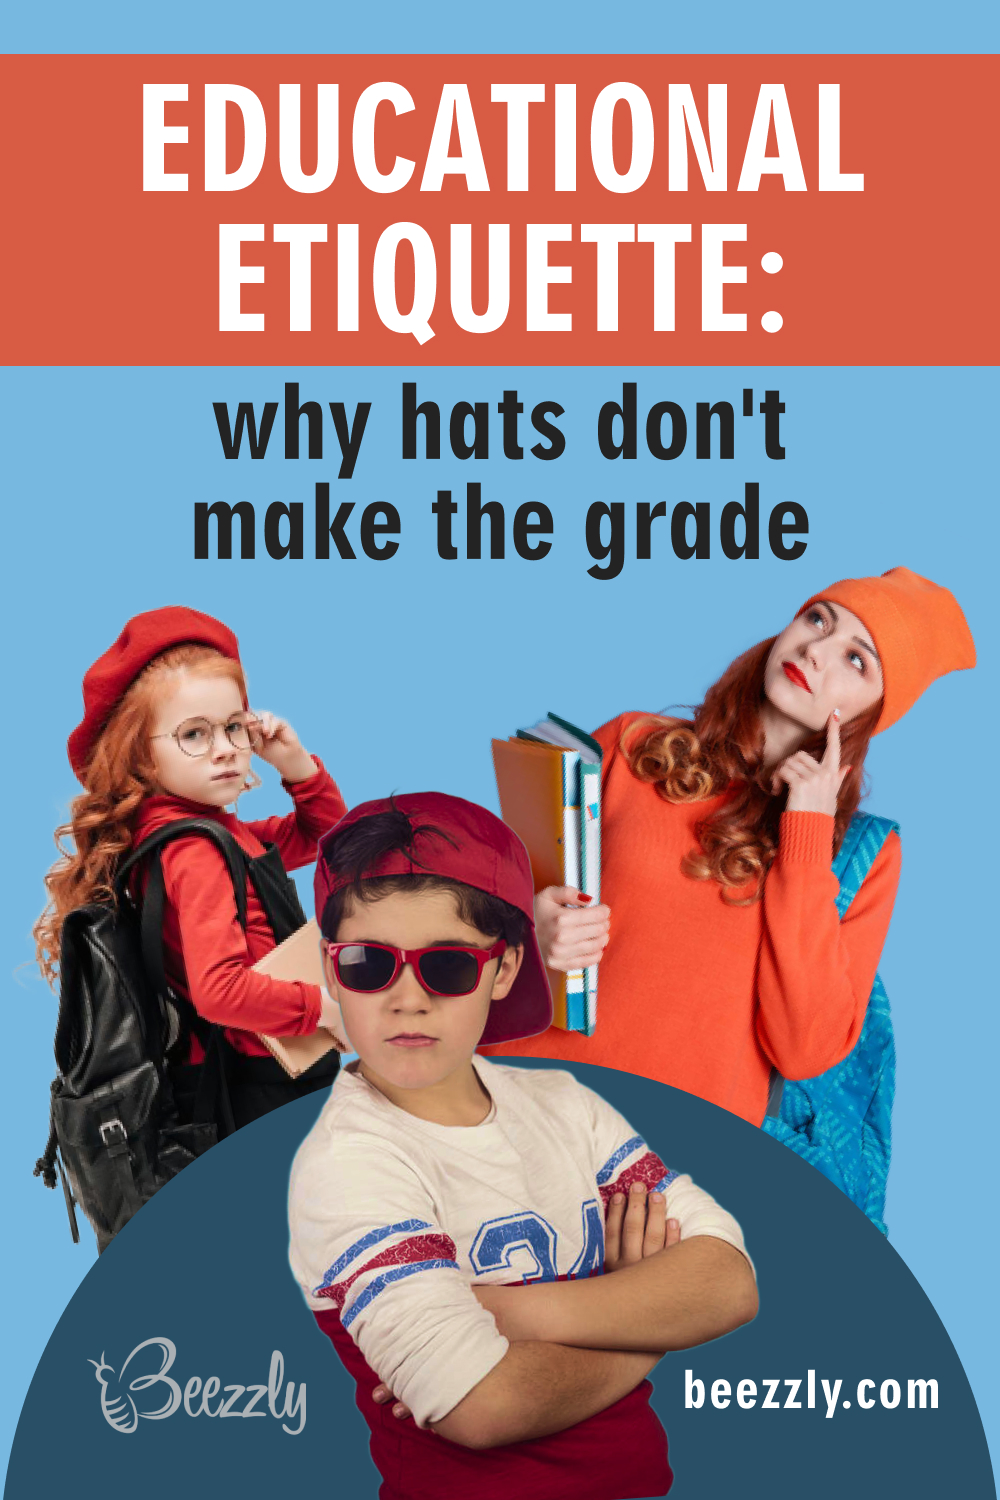 Educational Etiquette Why Hats Don’t Make the Grade